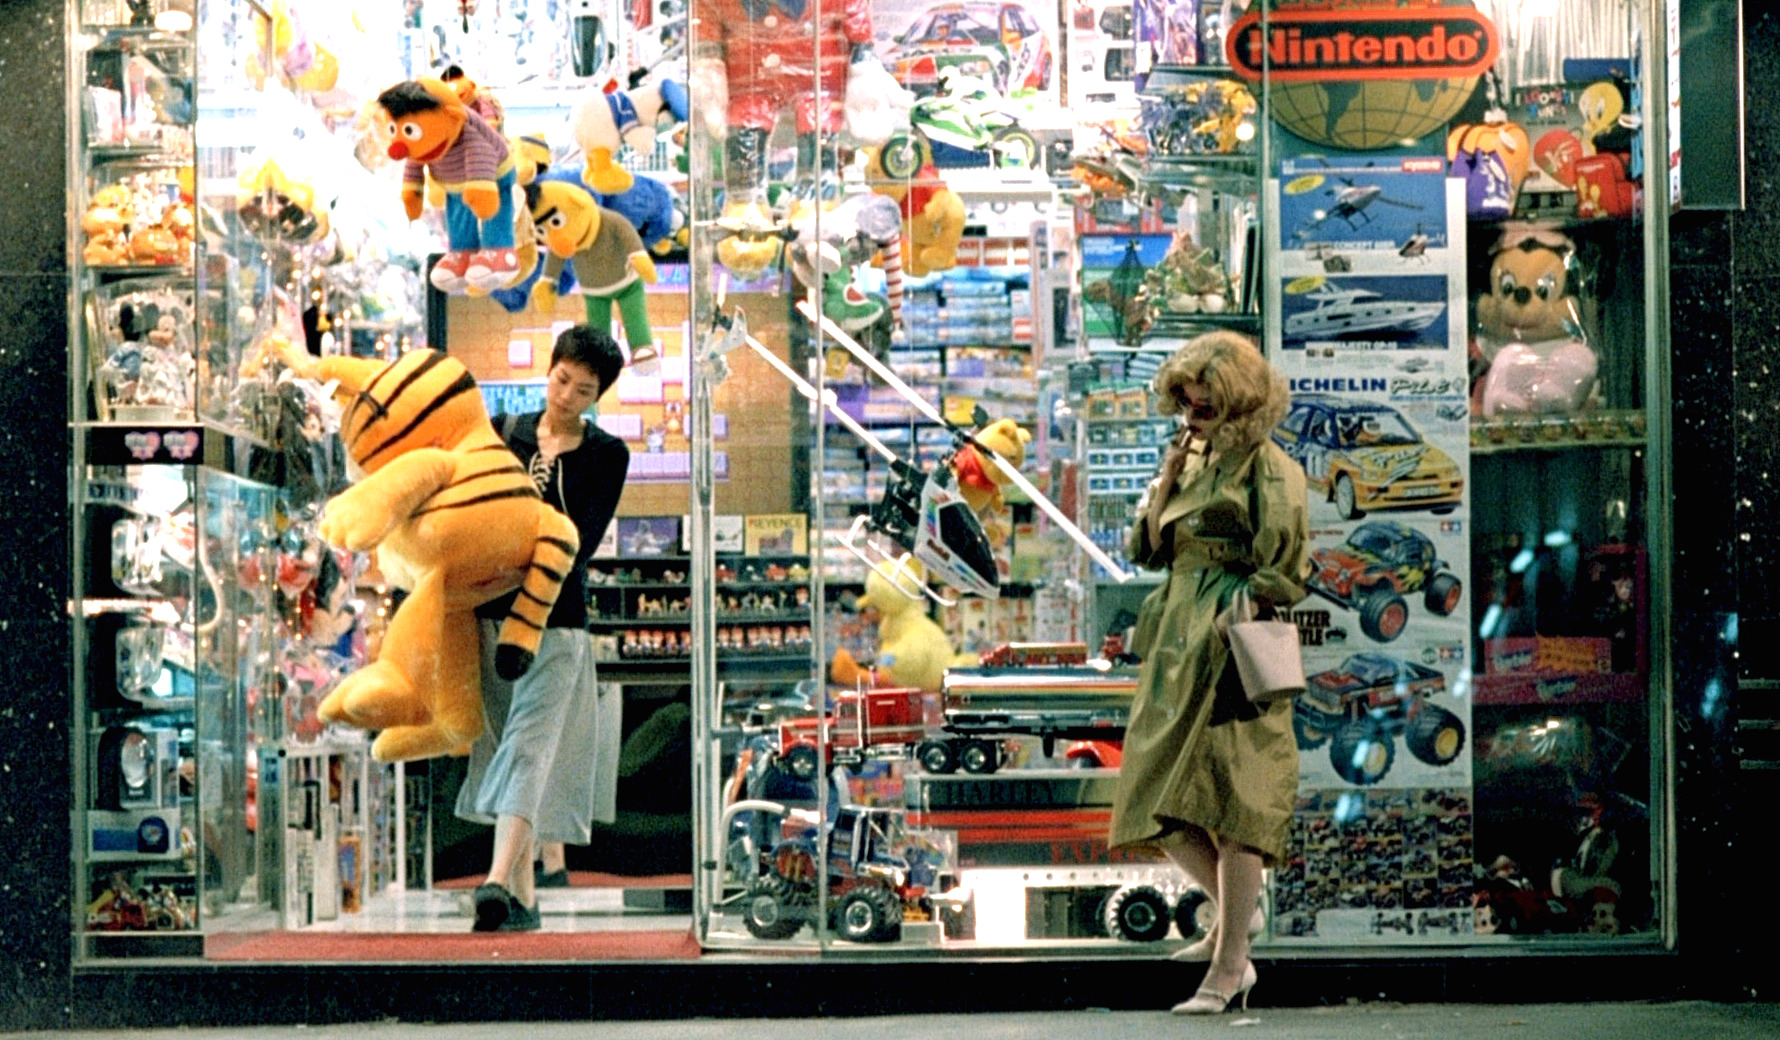 This is a film still from Chungking Express. A woman in sunglasses and a blond wig stands outside a toy store in Hong Kong smoking a cigarette. Another woman is walking out of the store with a large stuffed animal of Garfield. The store is packed with lots of 90s era toys.